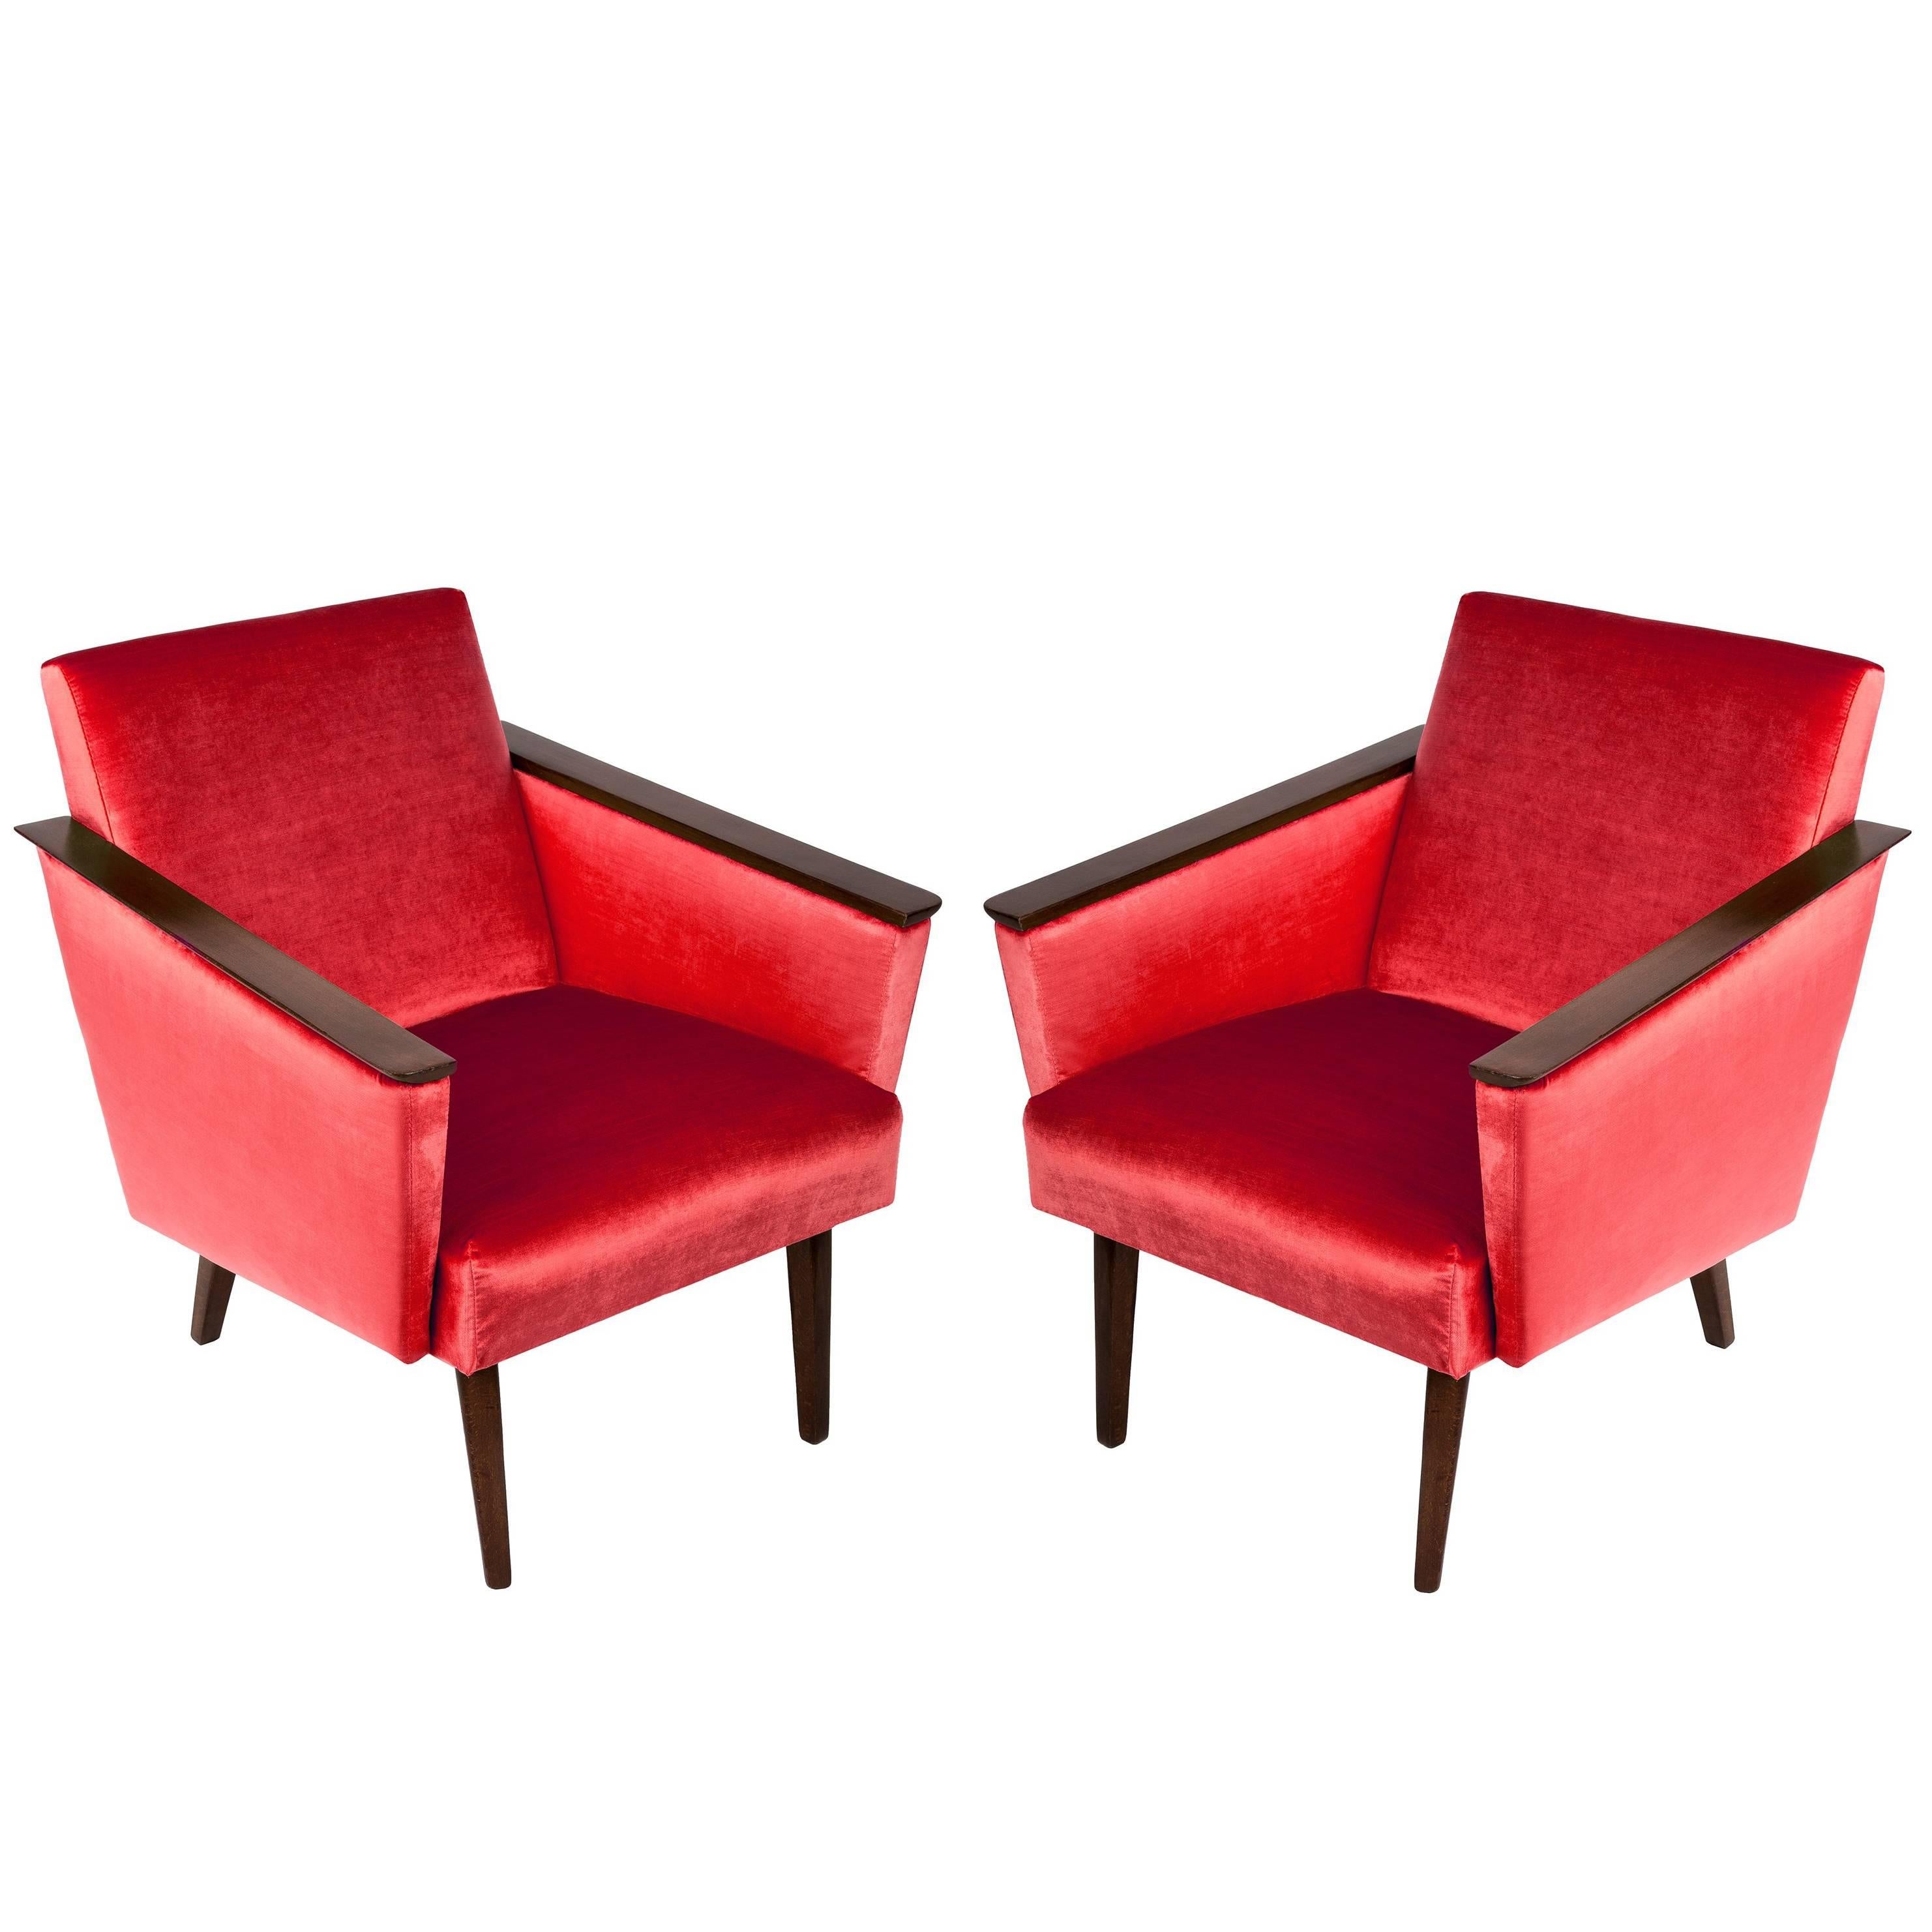 Pair of Red Armchairs, 1960s, DDR, Germany